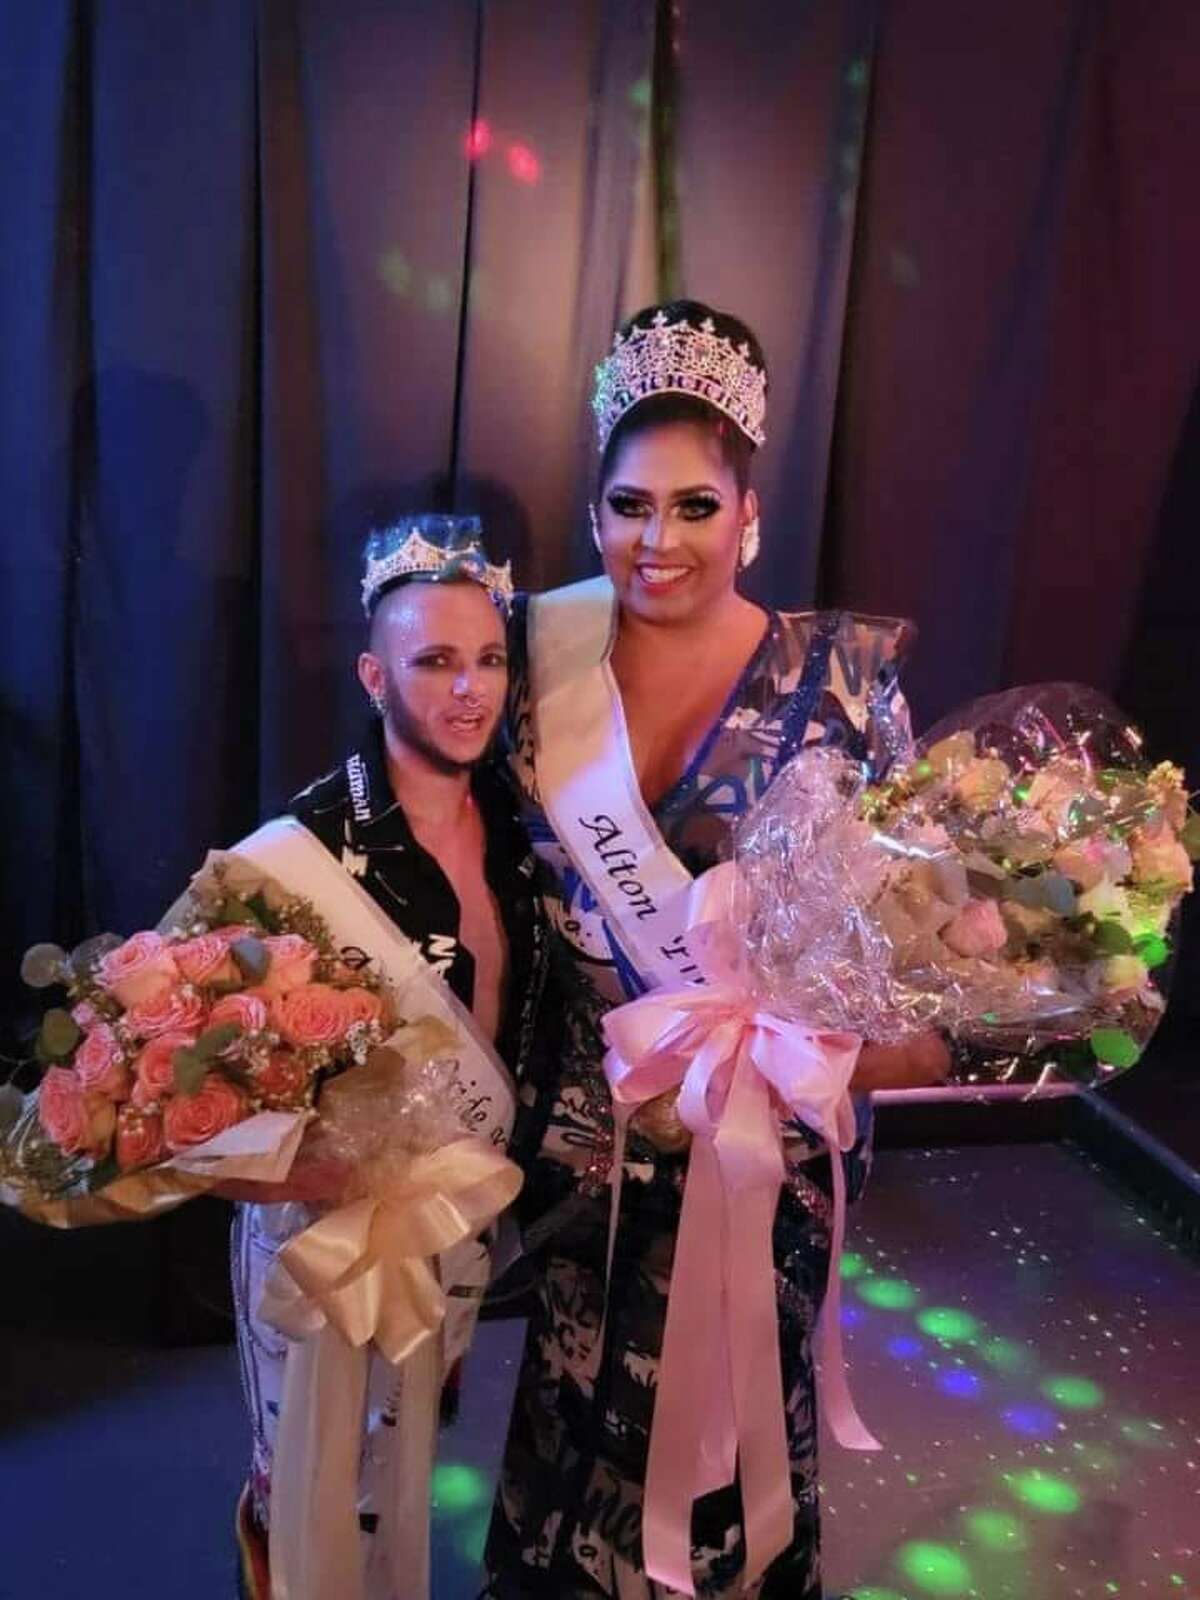 Alton Pride's firsts, King Jaq Xavier Qrowand and Queen Chasity Valentino. The king and queen will make appearances at the inaugural Alton Pride Festival Saturday, Sept. 10 from noon-10 p.m.